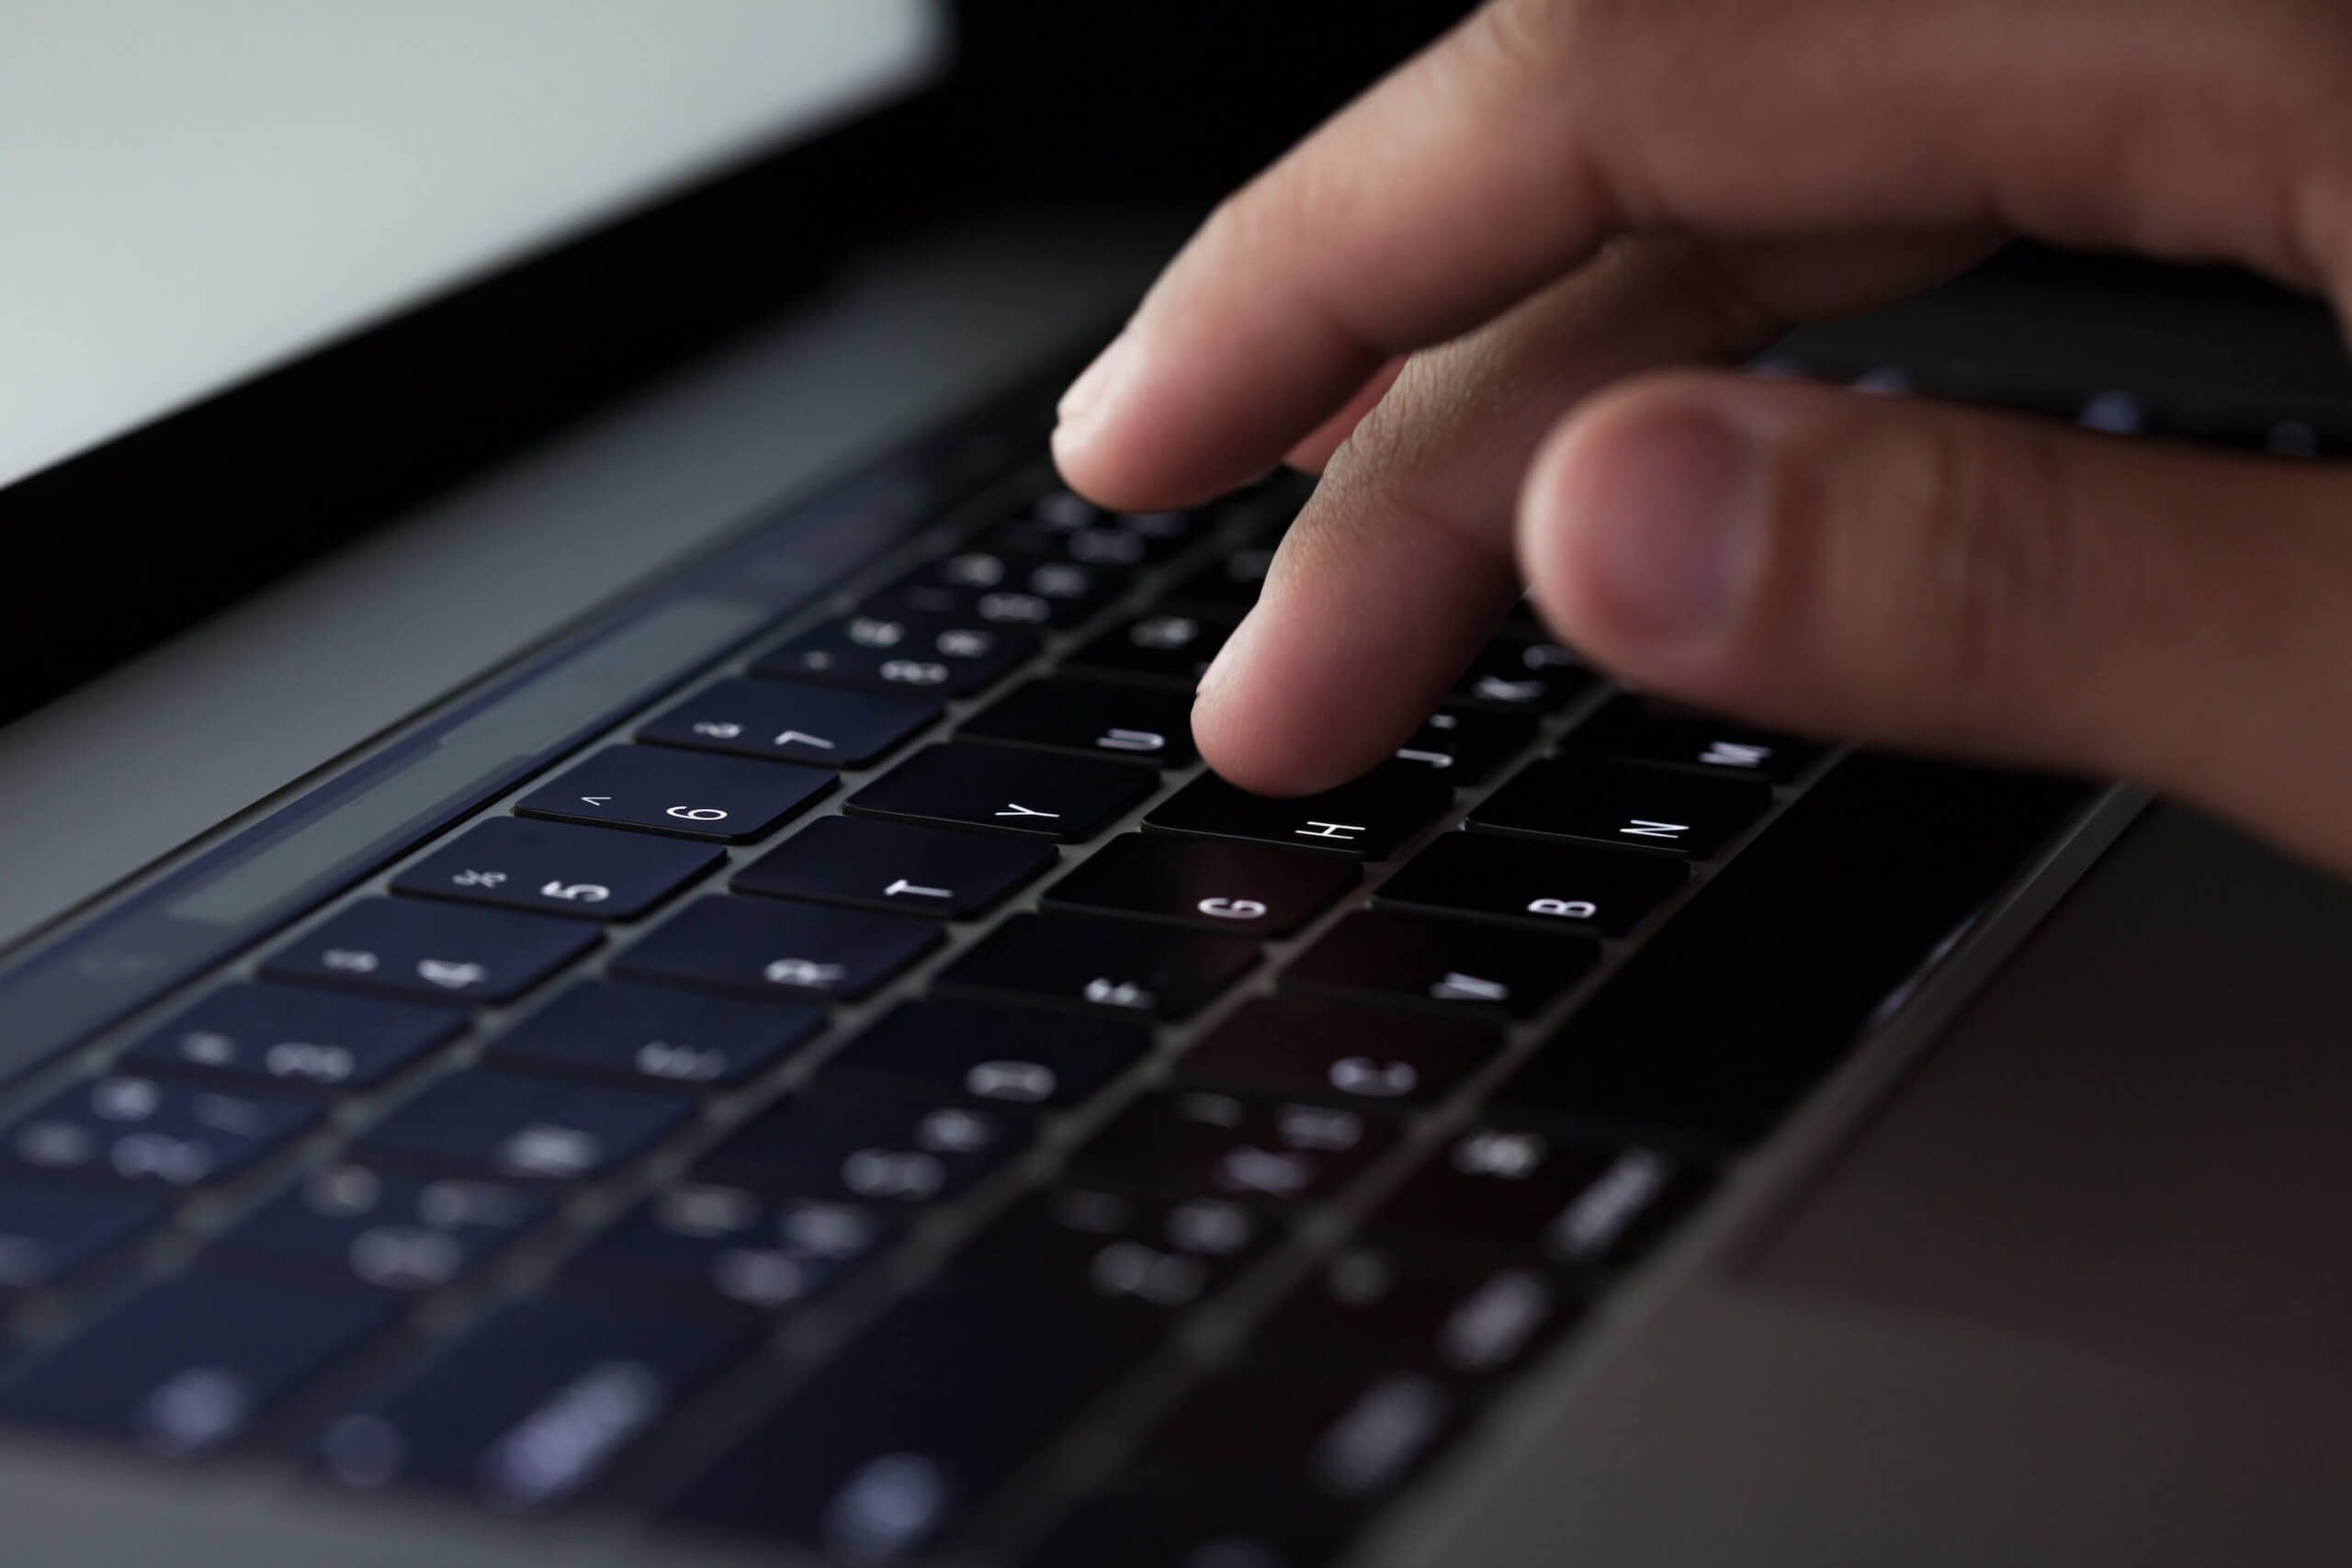 Apple to fully phase out MacBook's butterfly keyboard by 2020